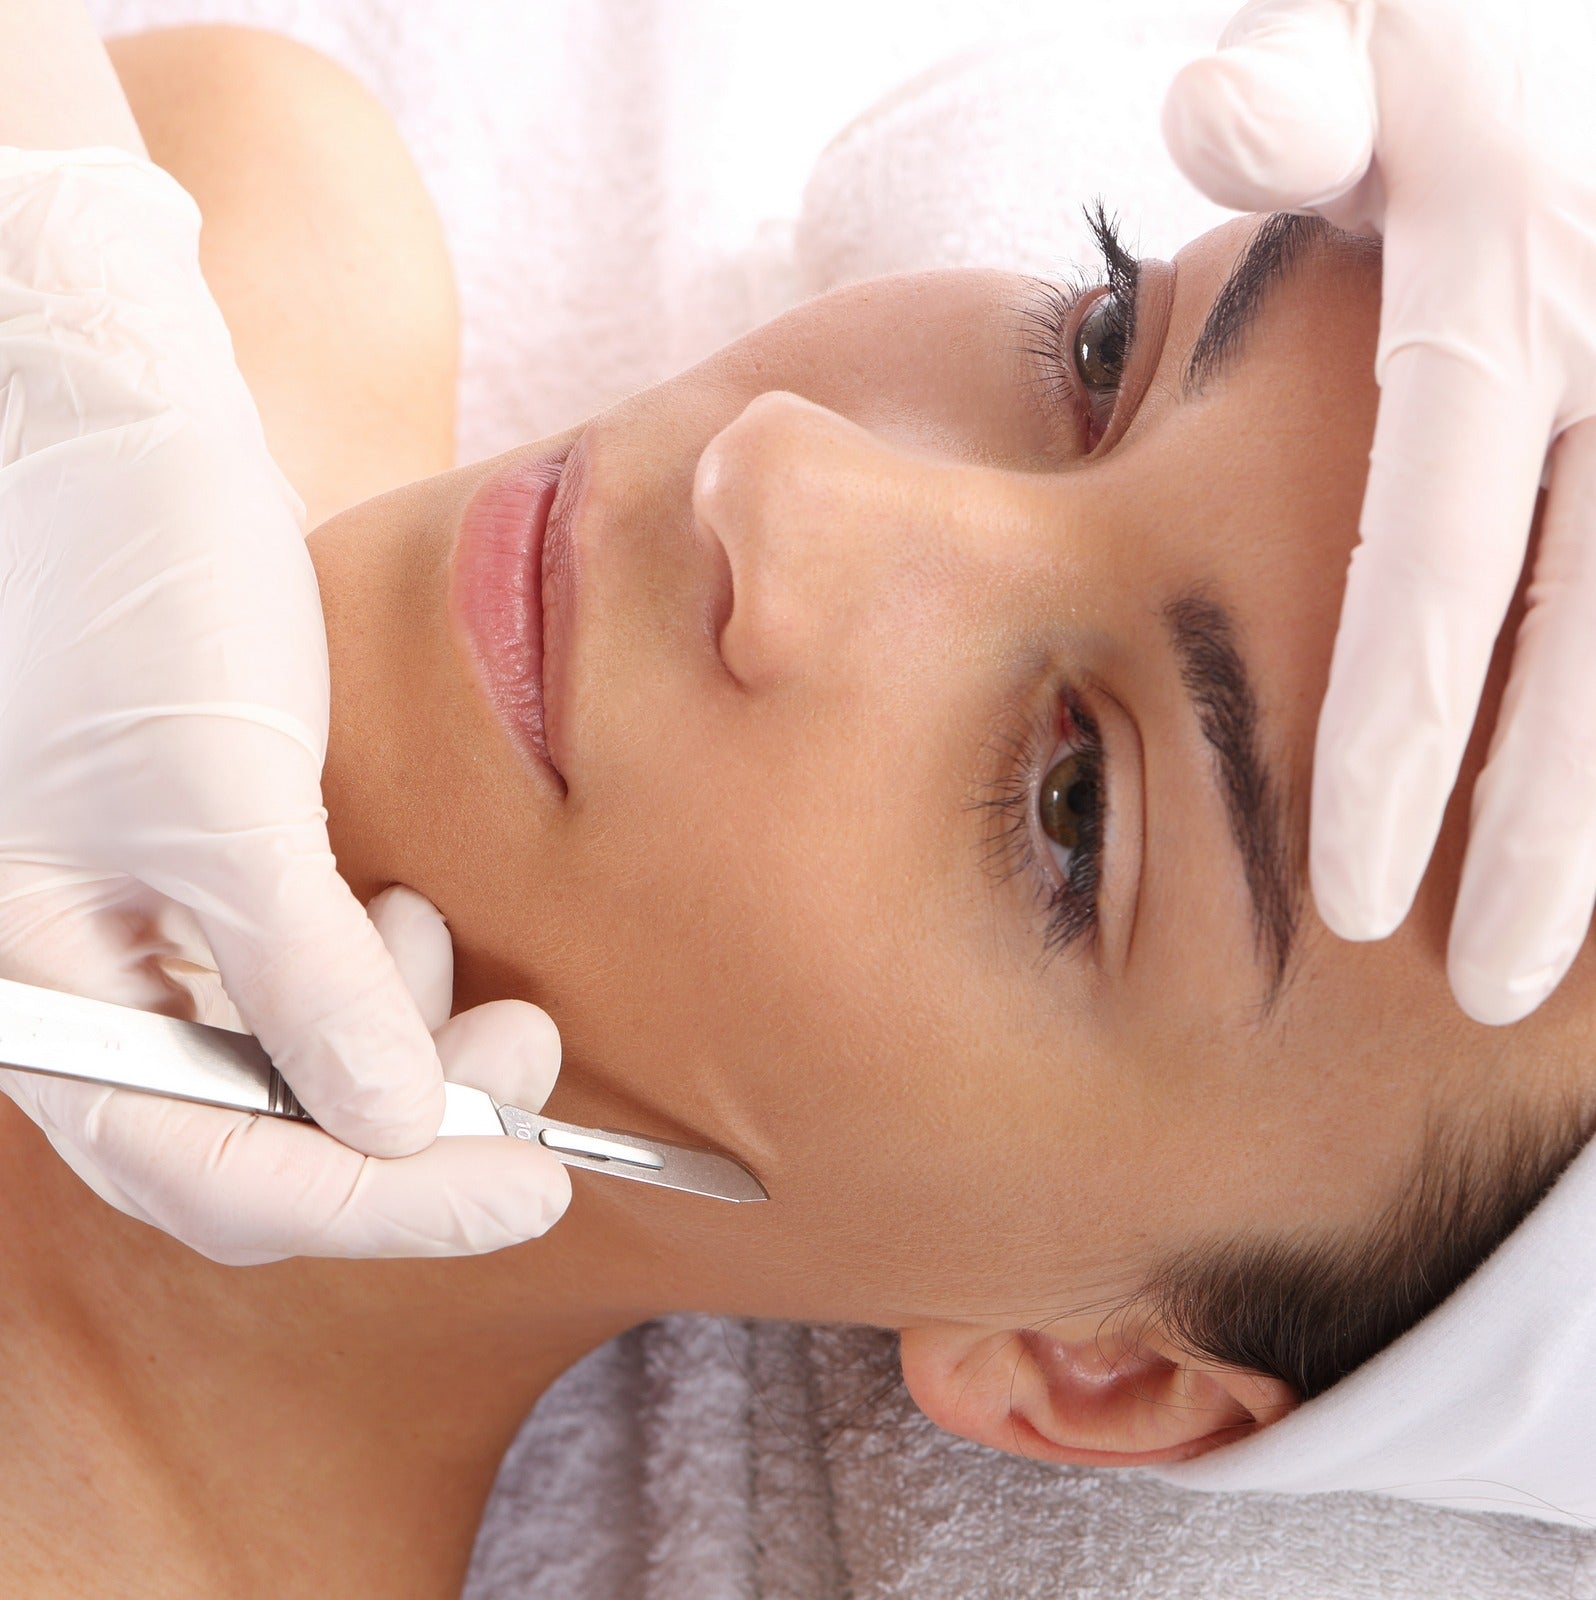 Image of a woman undergoing dermaplaning